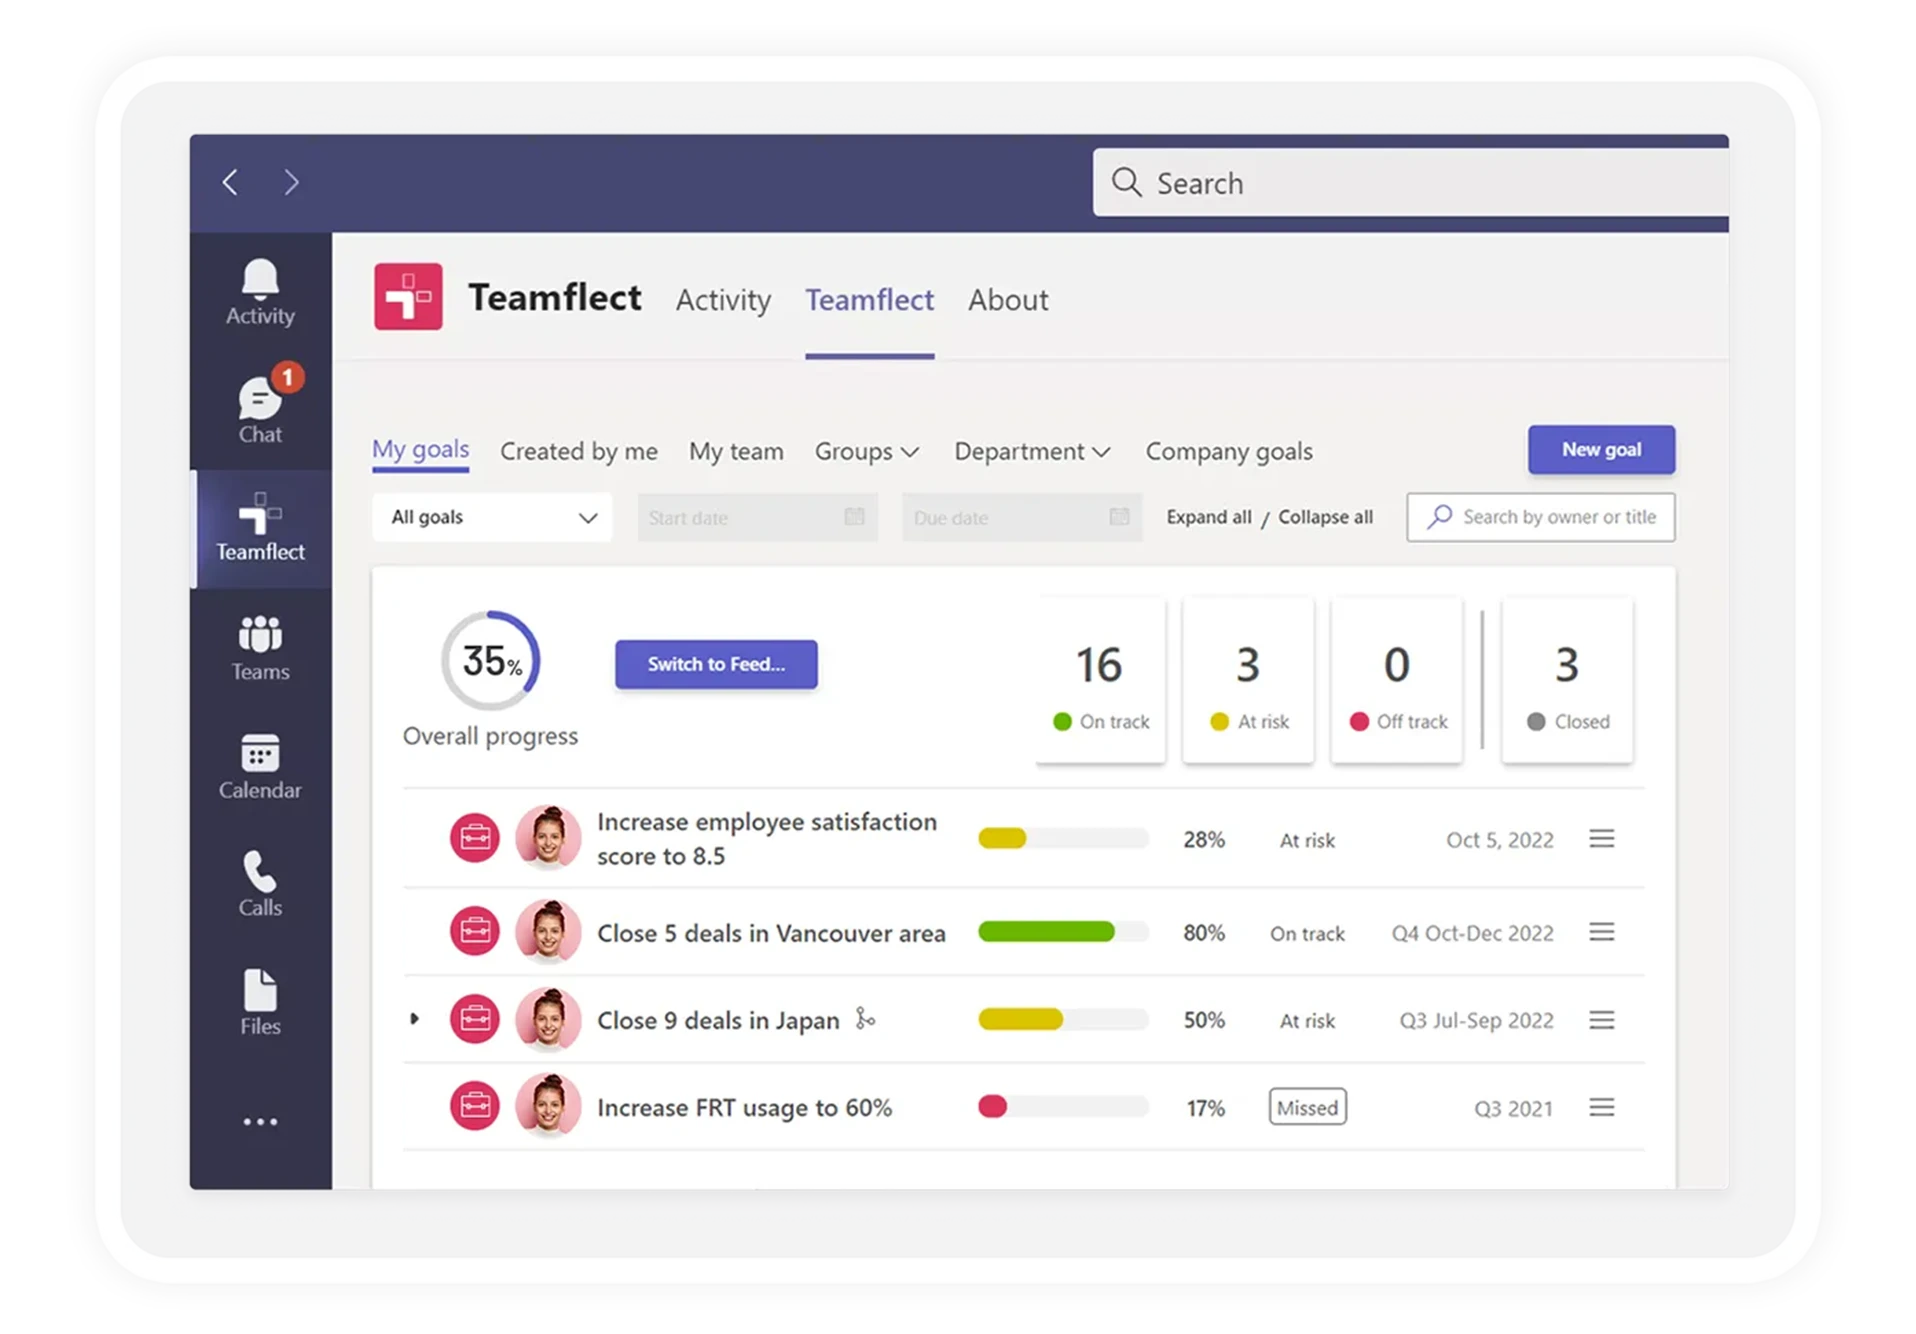 Goal module screen of Teamflect in Microsoft Teams with one active goal